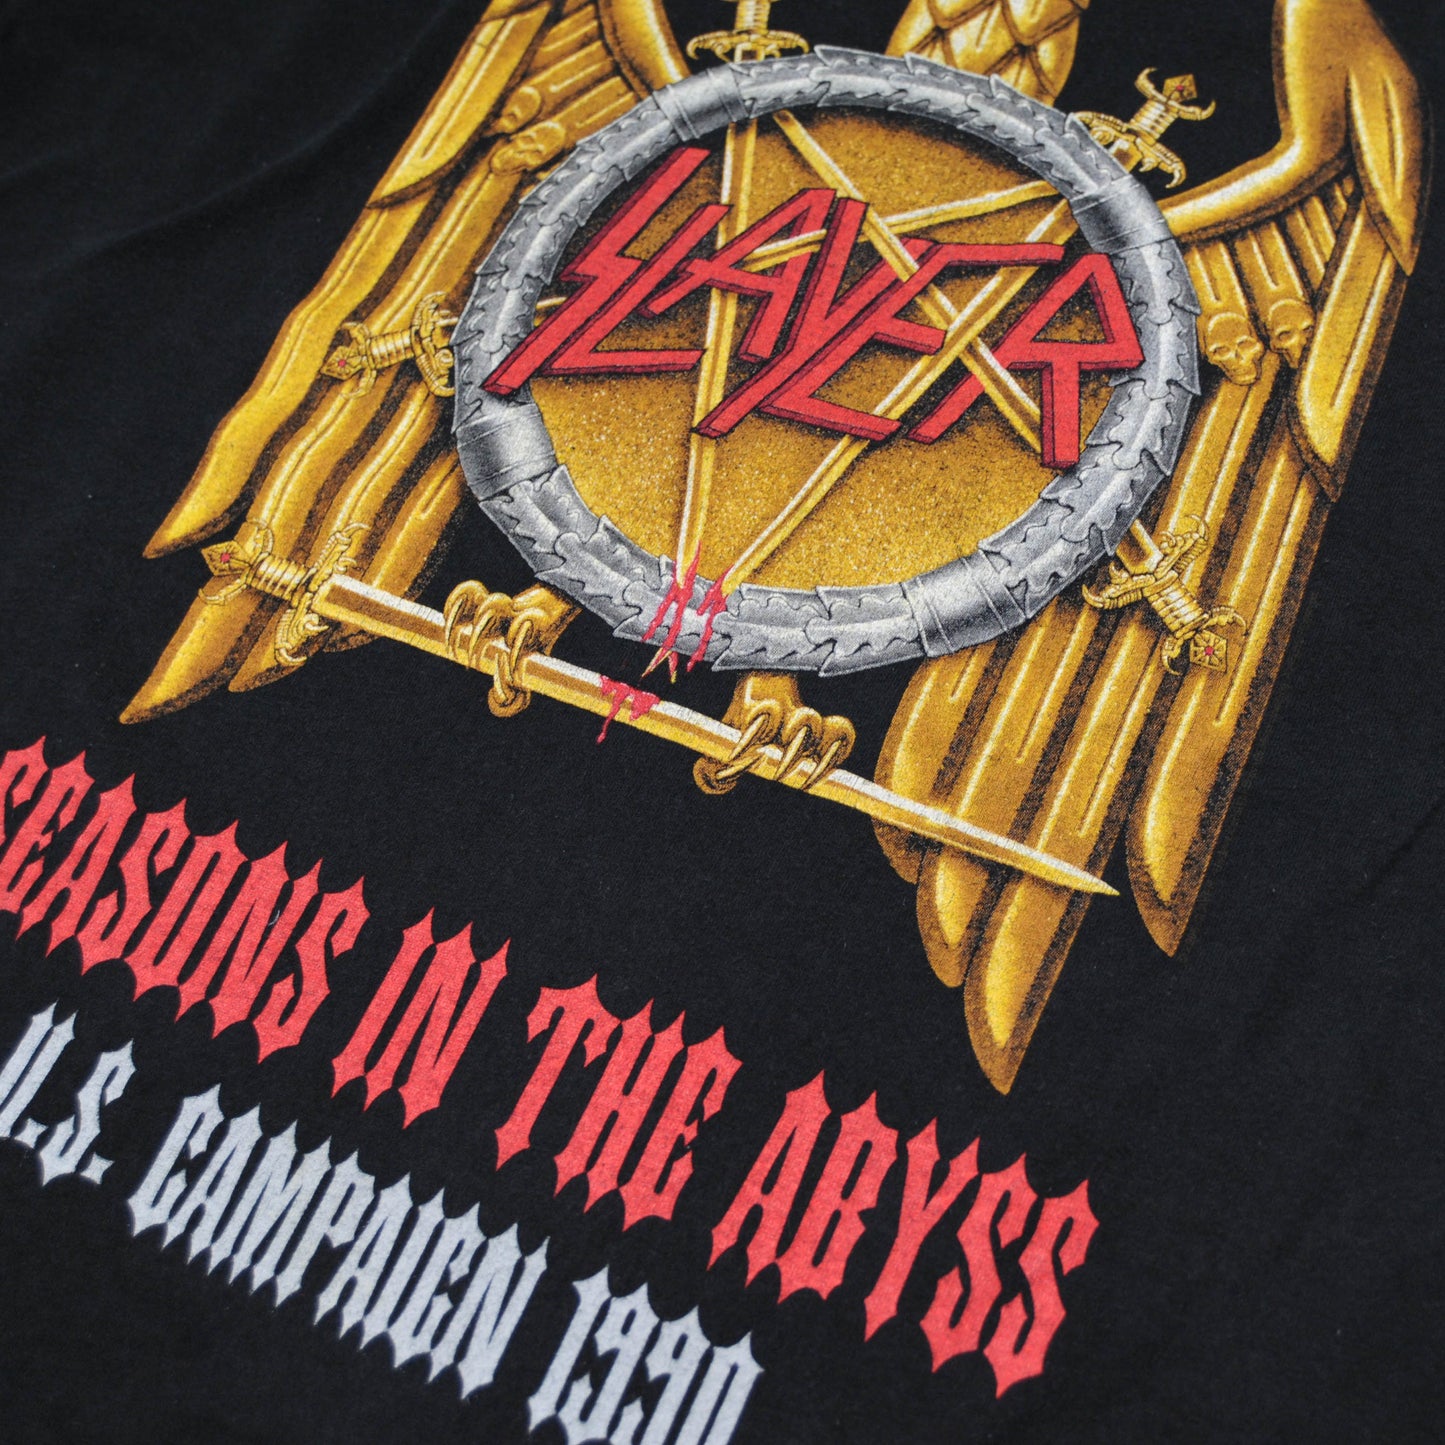 00's SLAYER SEASONS IN THE ABYSS Tシャツ(XL)/A3040T-S